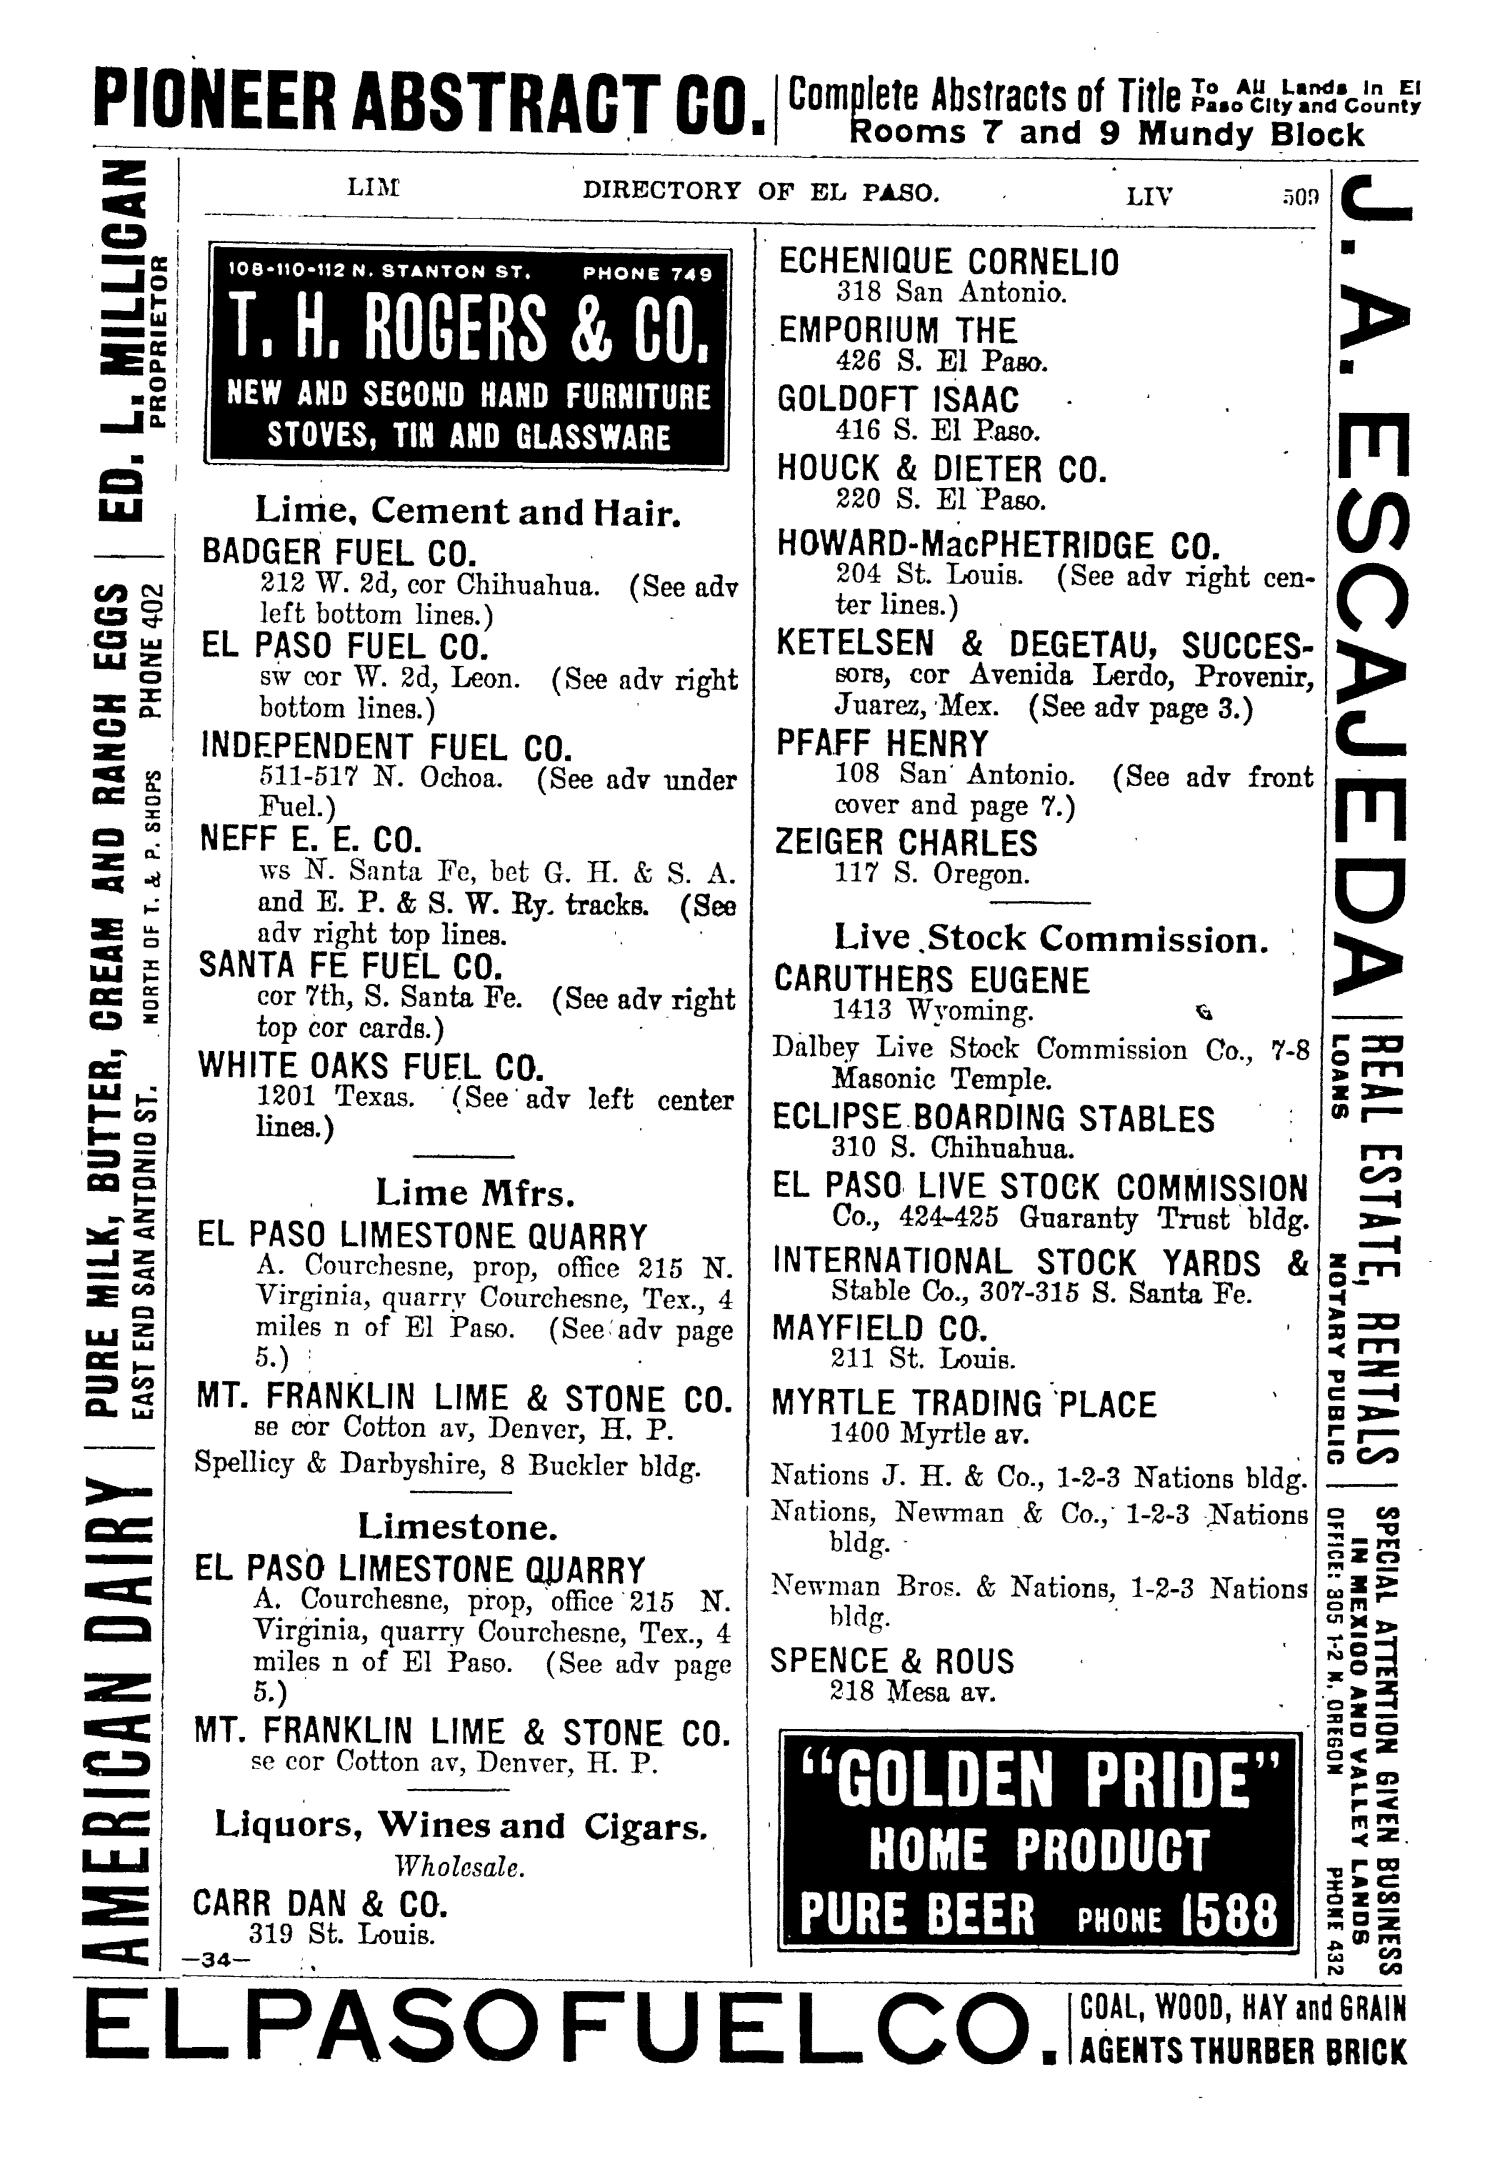 John F. Worley & Co.'s El Paso Directory for 1906
                                                
                                                    509
                                                